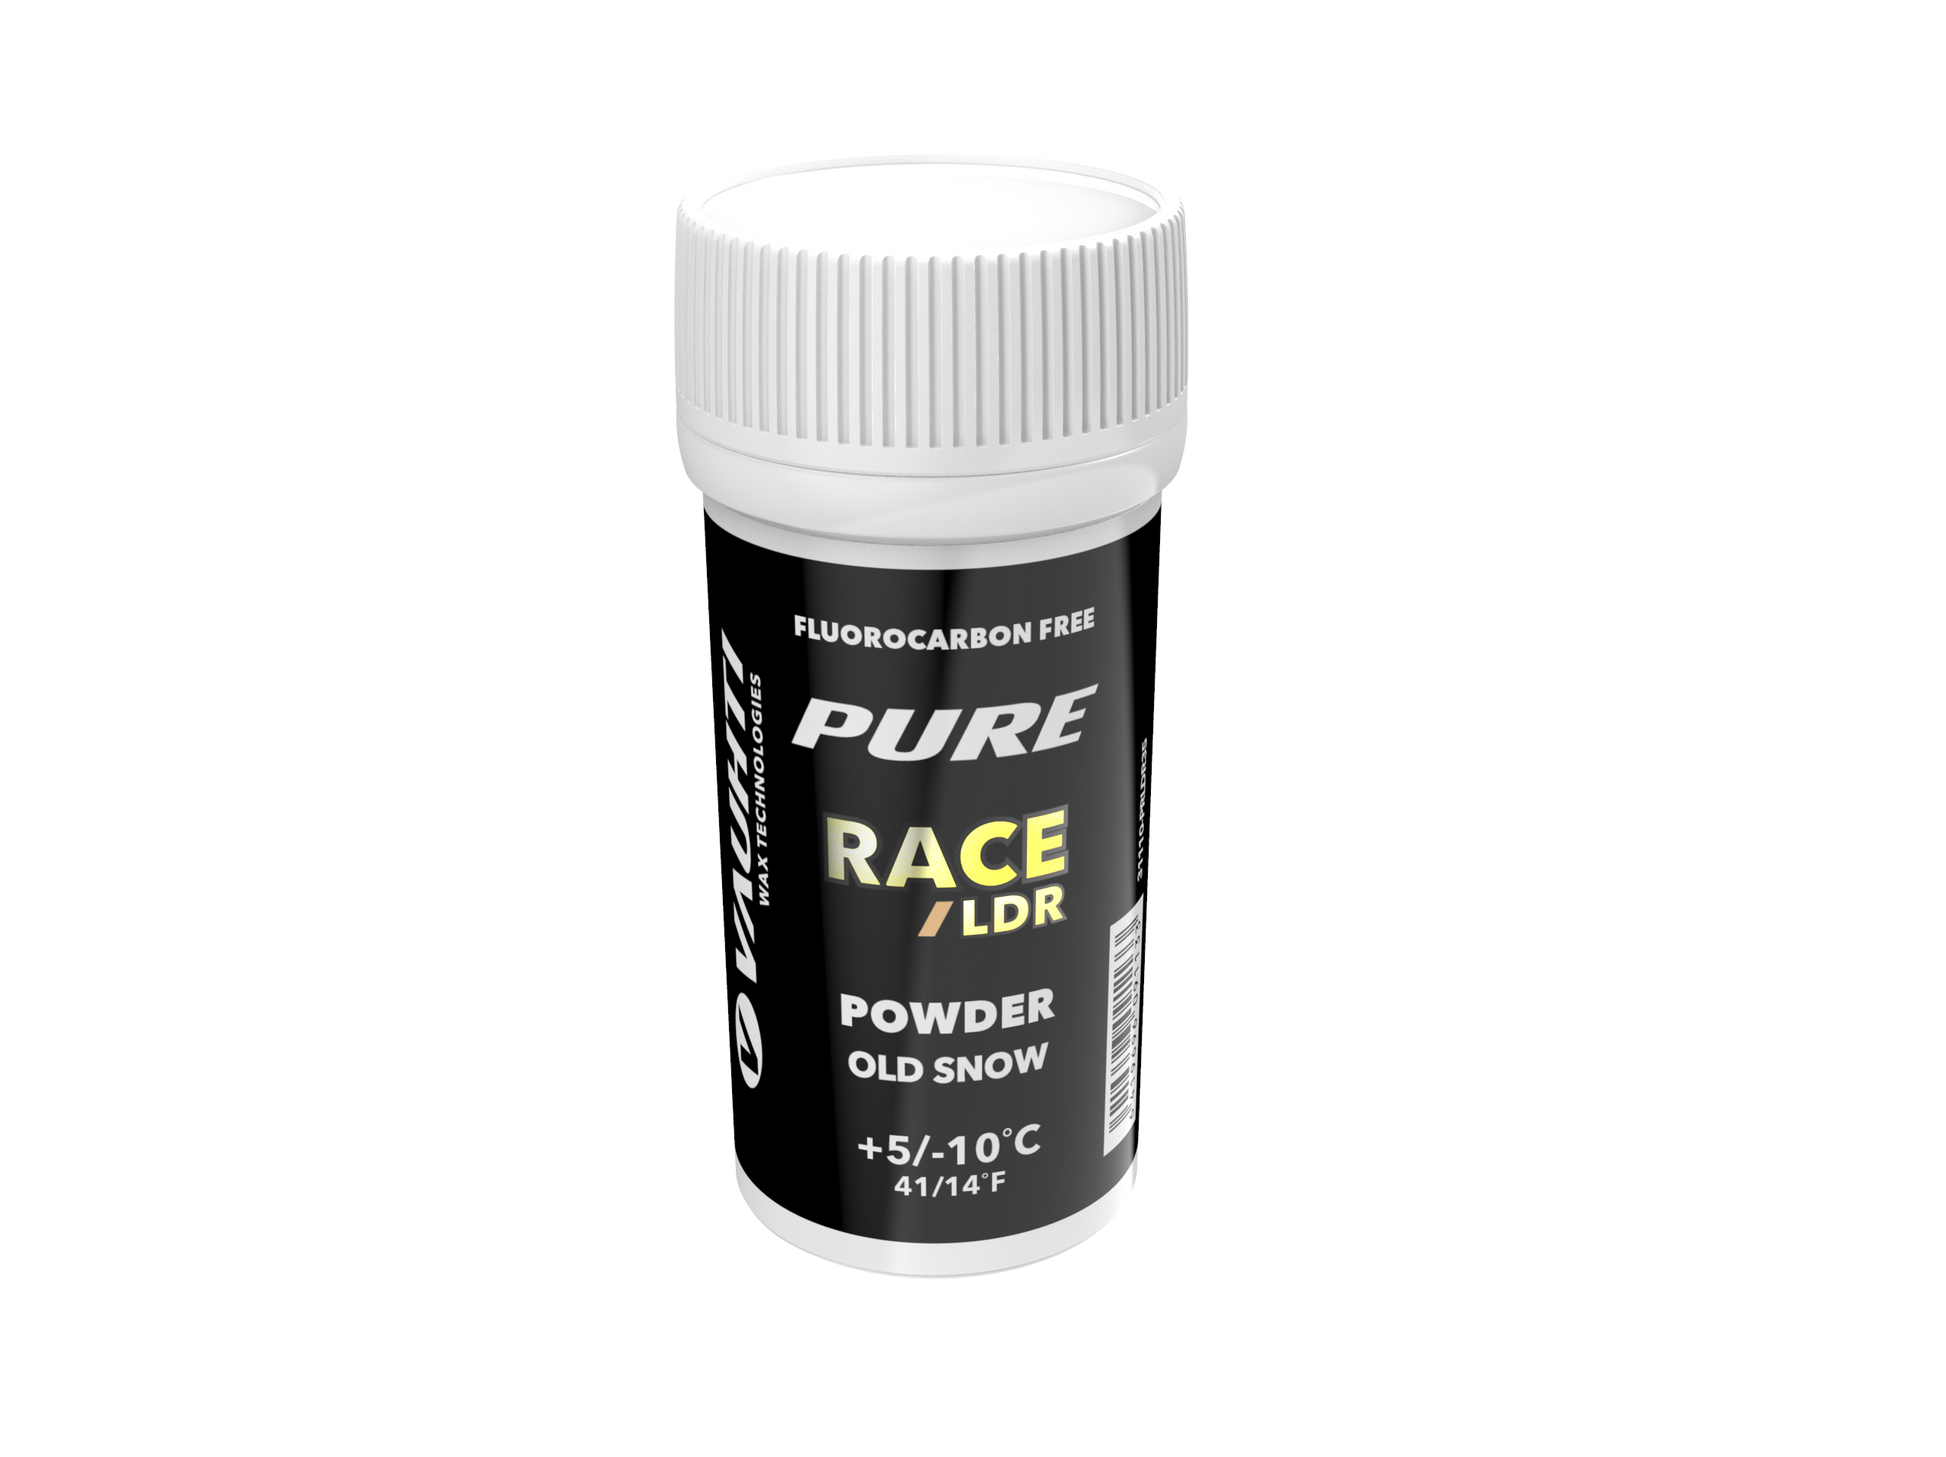 Bottle of PURE RACE OLD SNOW LDR POWDER